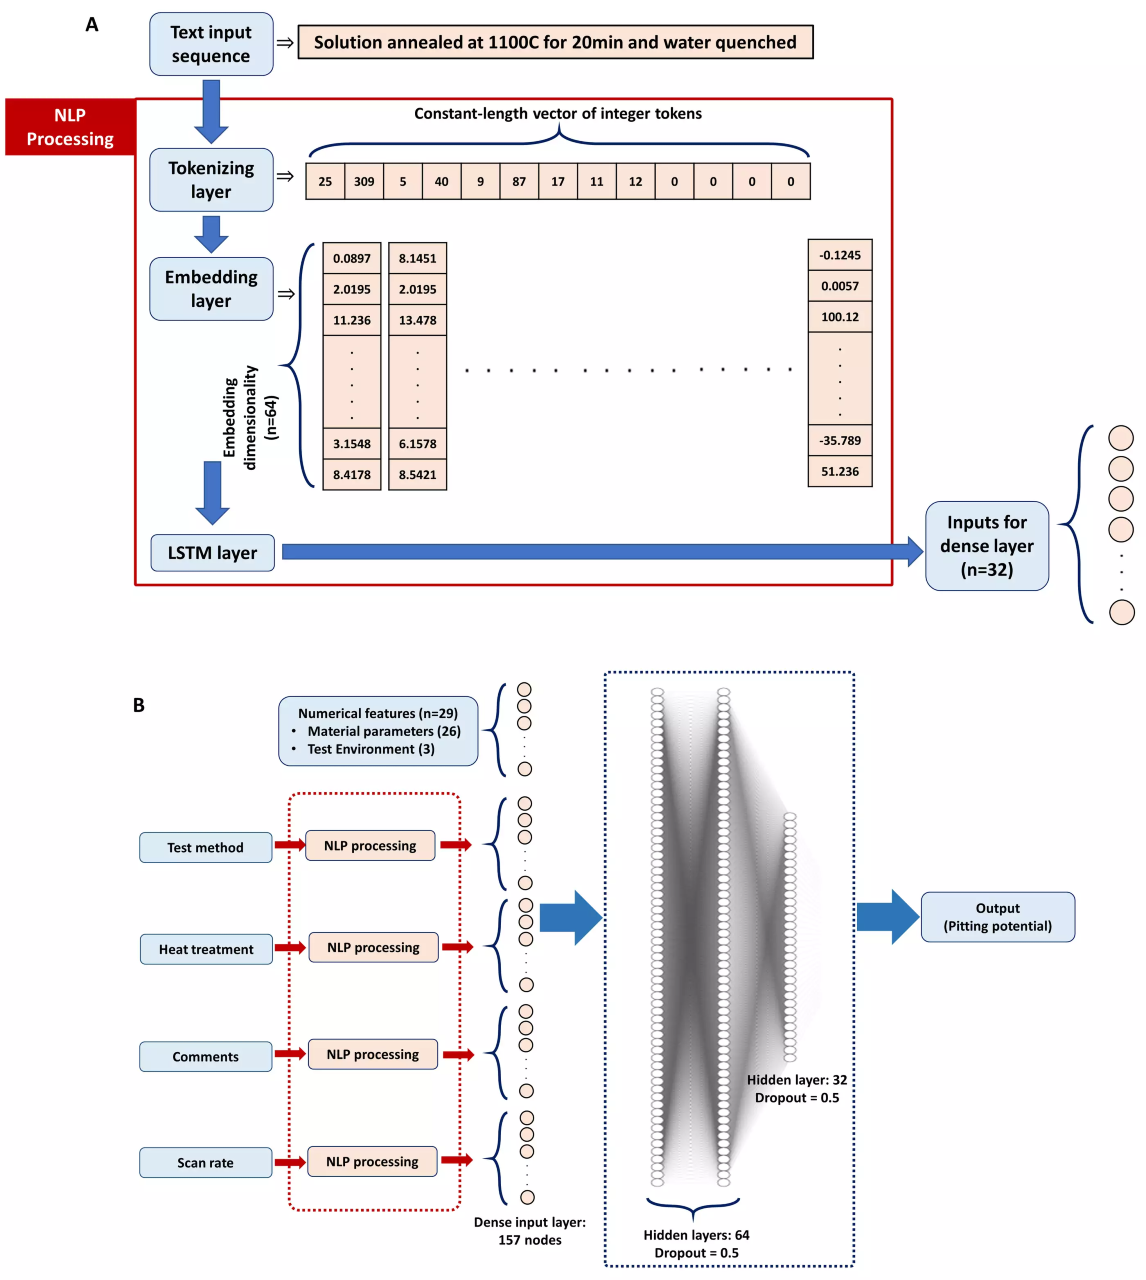 (a) Schematic representation of the entire process-aware deep neural network model, and (b) Schematic illustration of the data processing workflow carried out within the natural language processing (NLP) module. LSTM stands for long short-term memory. Image from Science Advances via Max Planck Society.